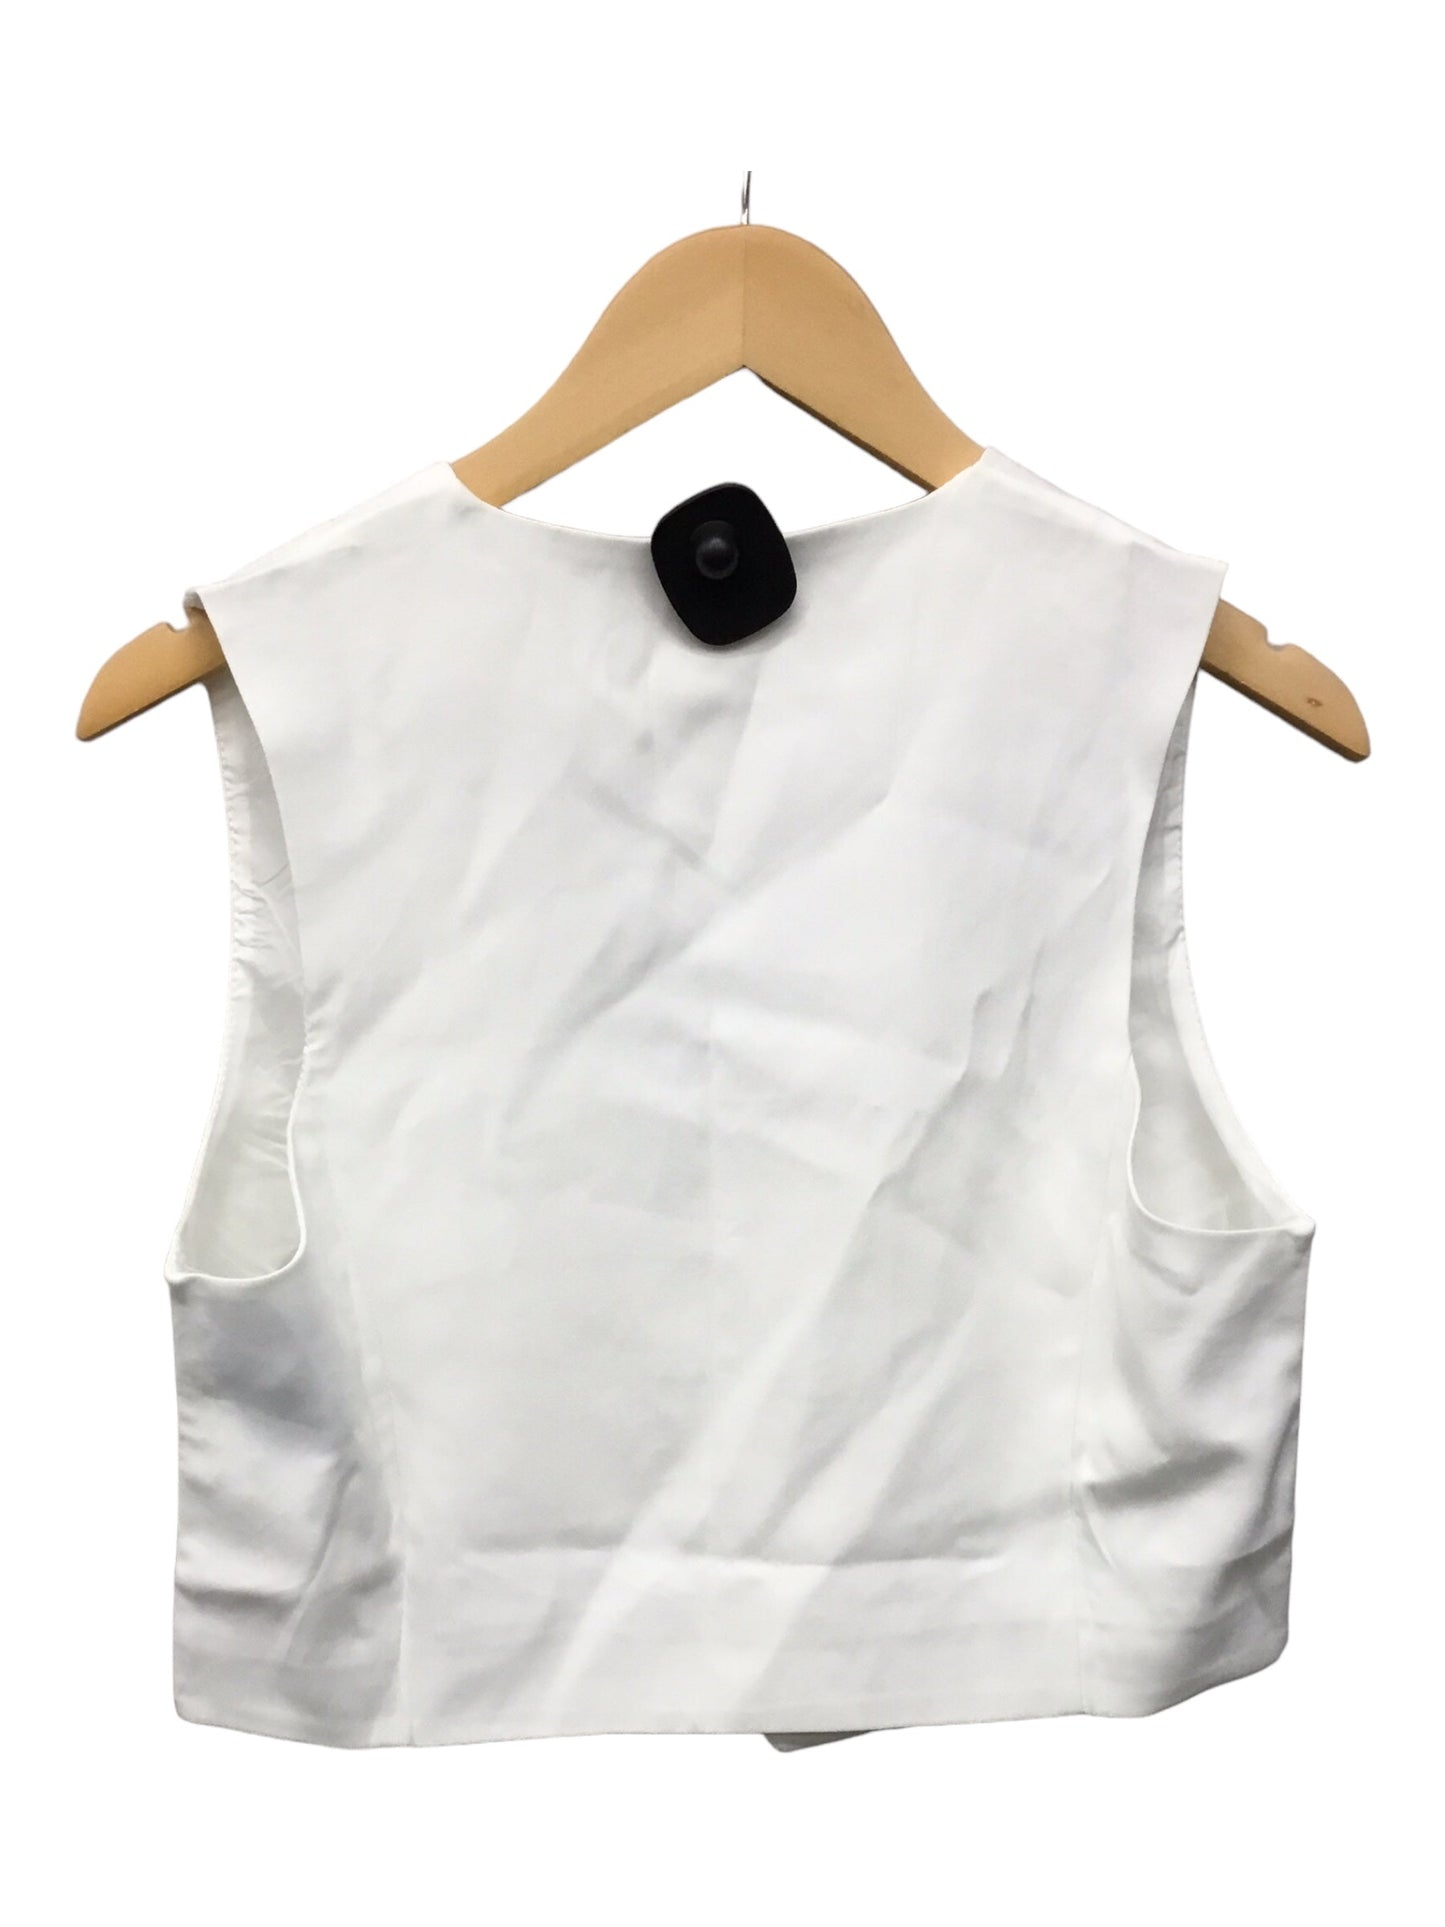 NWT White Vest Other Clothes Mentor, Size M